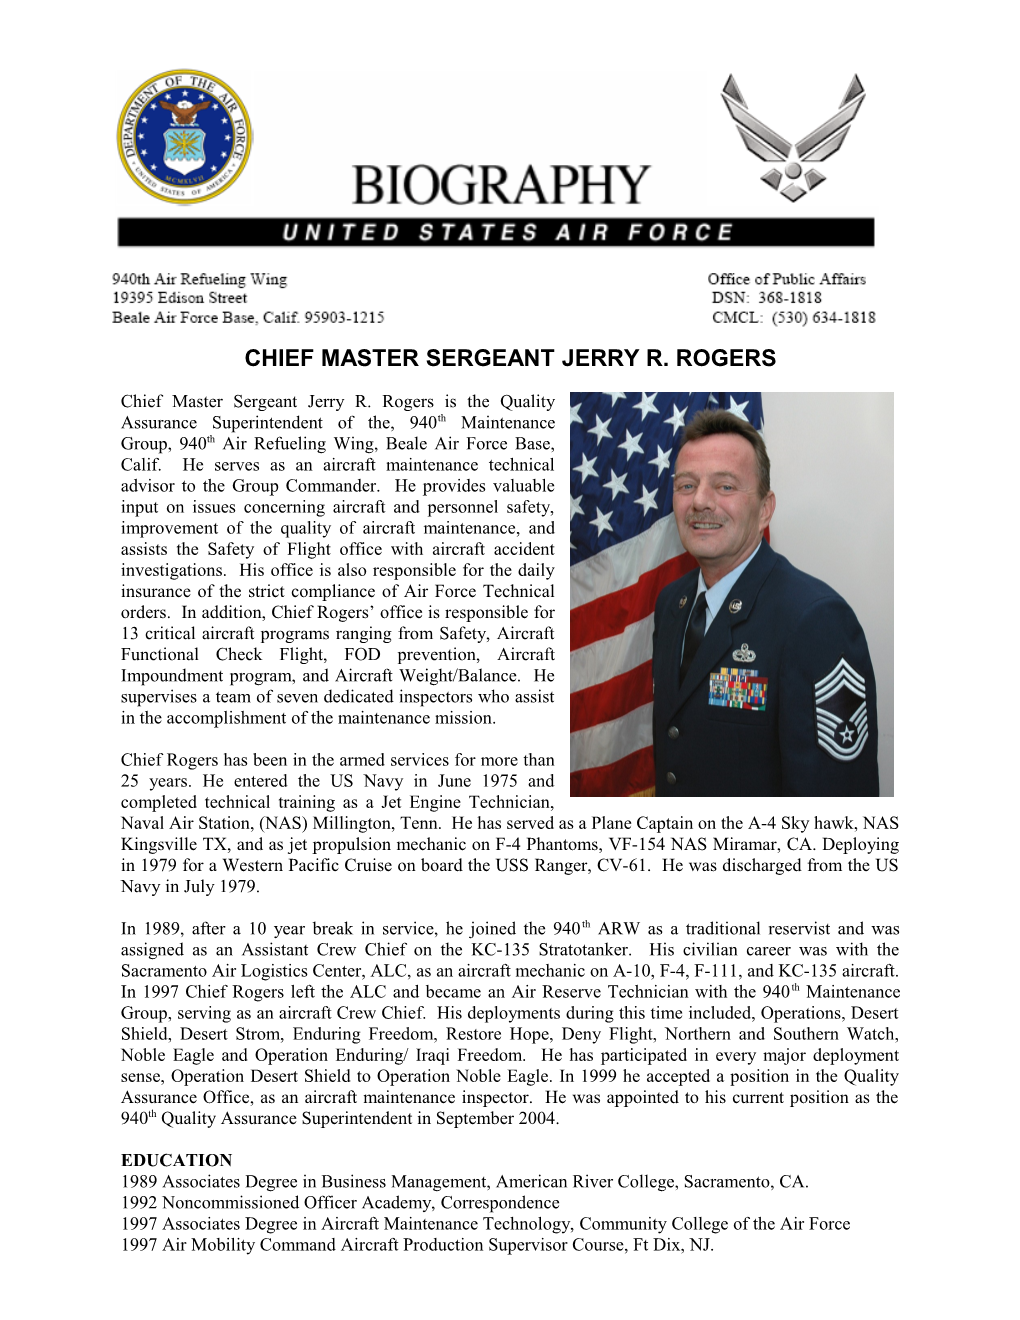 Chief Master Sergeant Jerry R. Rogers